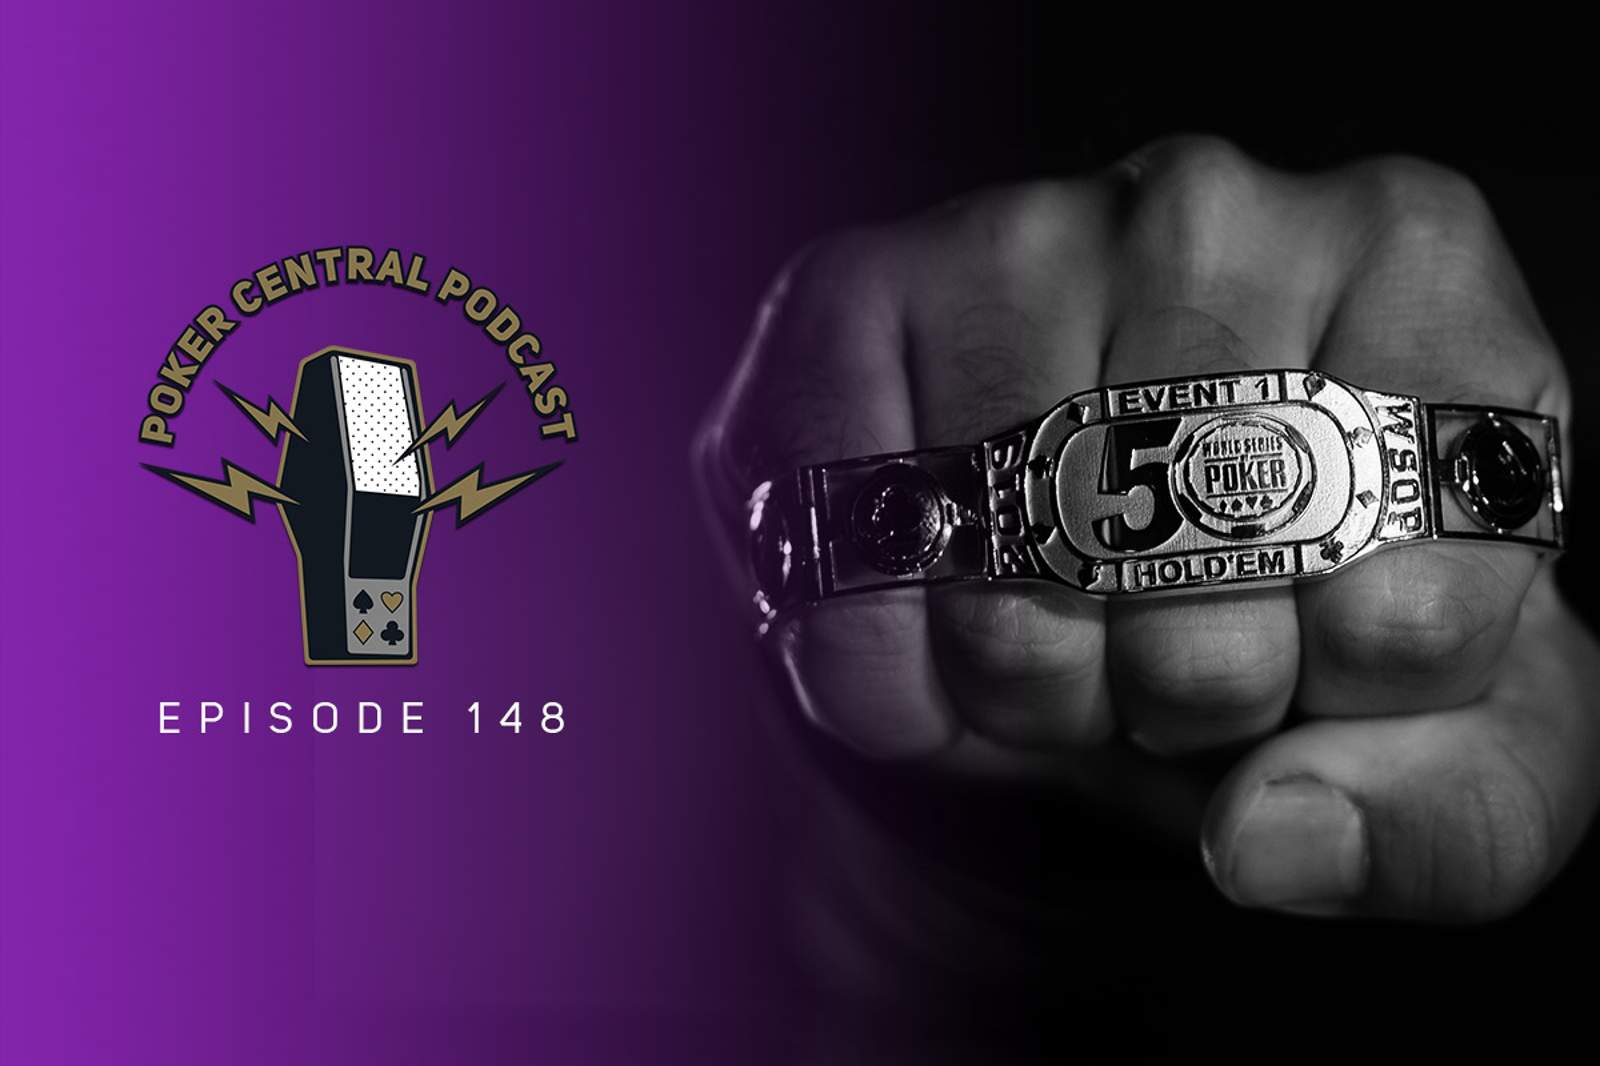 Ep. 148 The 2019 WSOP is Finally Here!